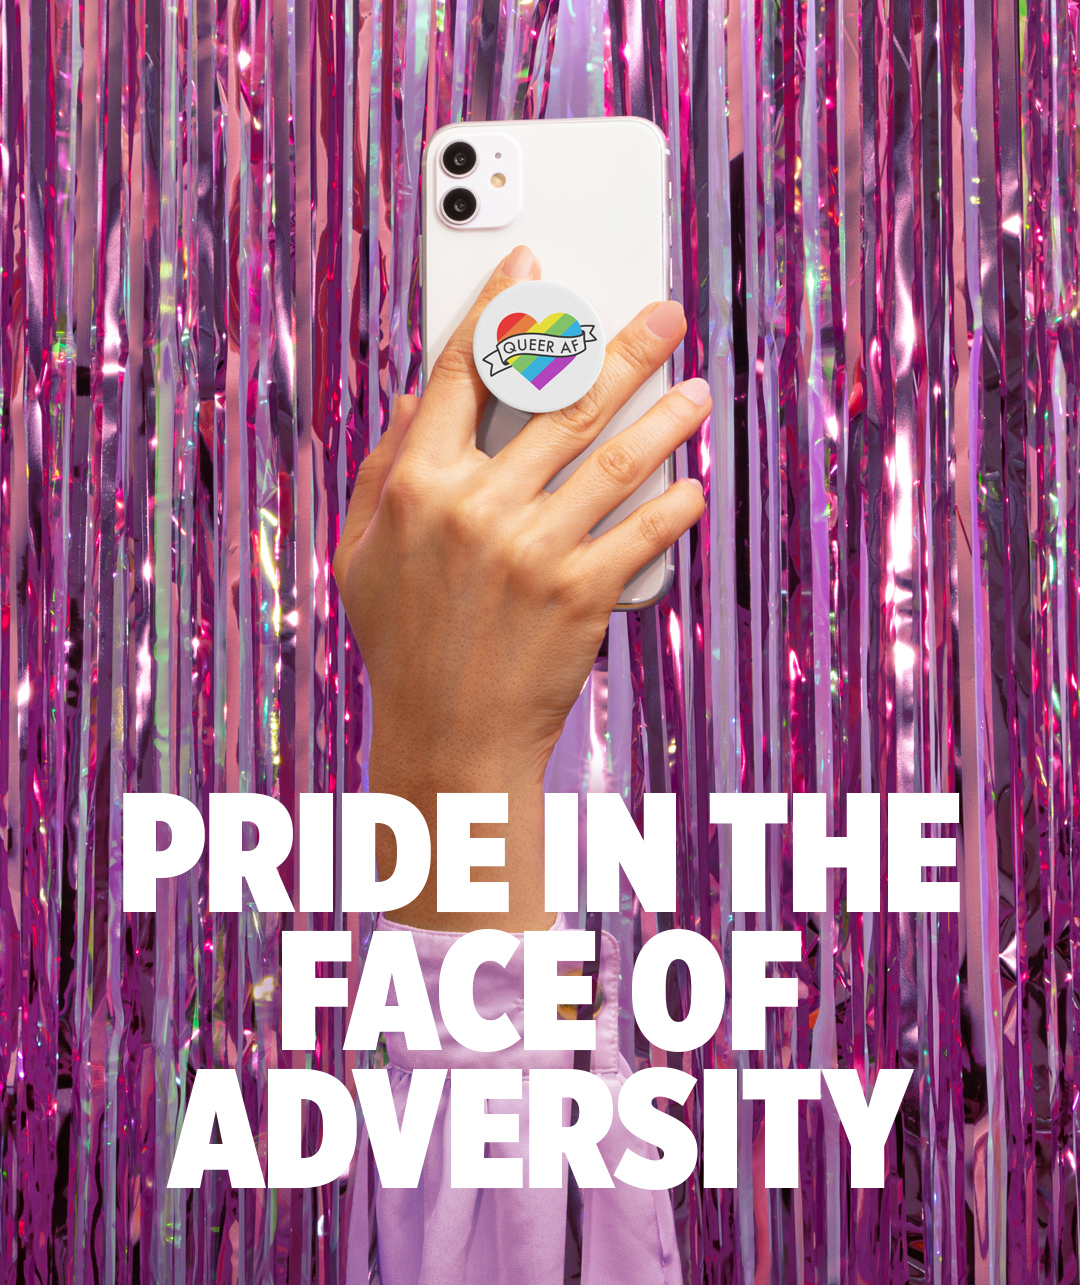 PRIDE IN THE FACE OF ADVERSITY